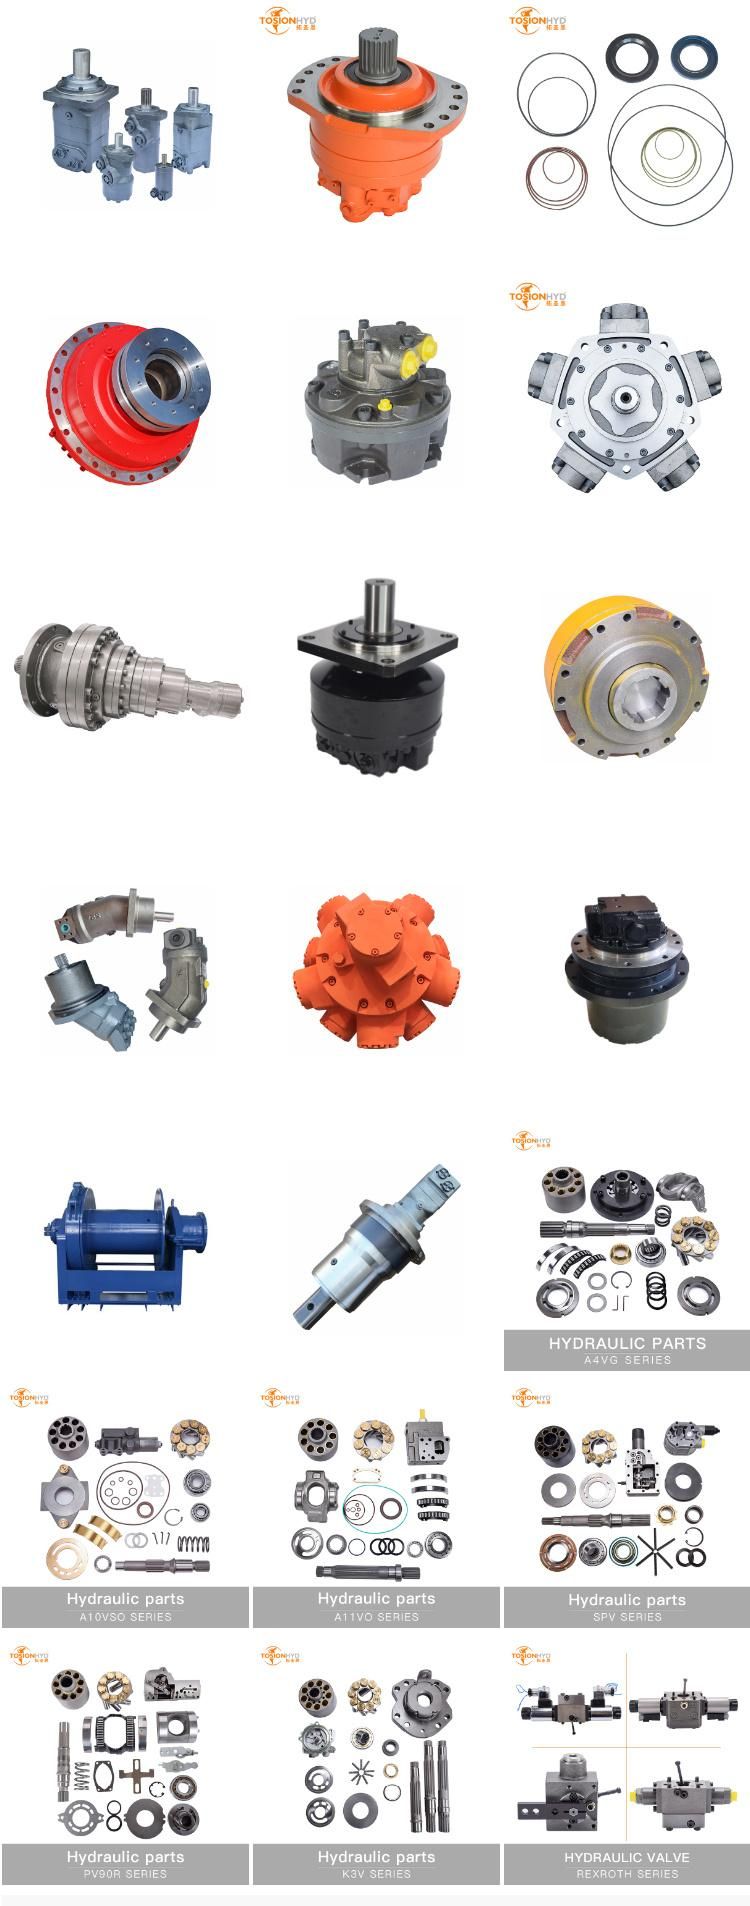 A6ve 107 Hydraulic Motor Parts with Rexroth Spare Repair Kits